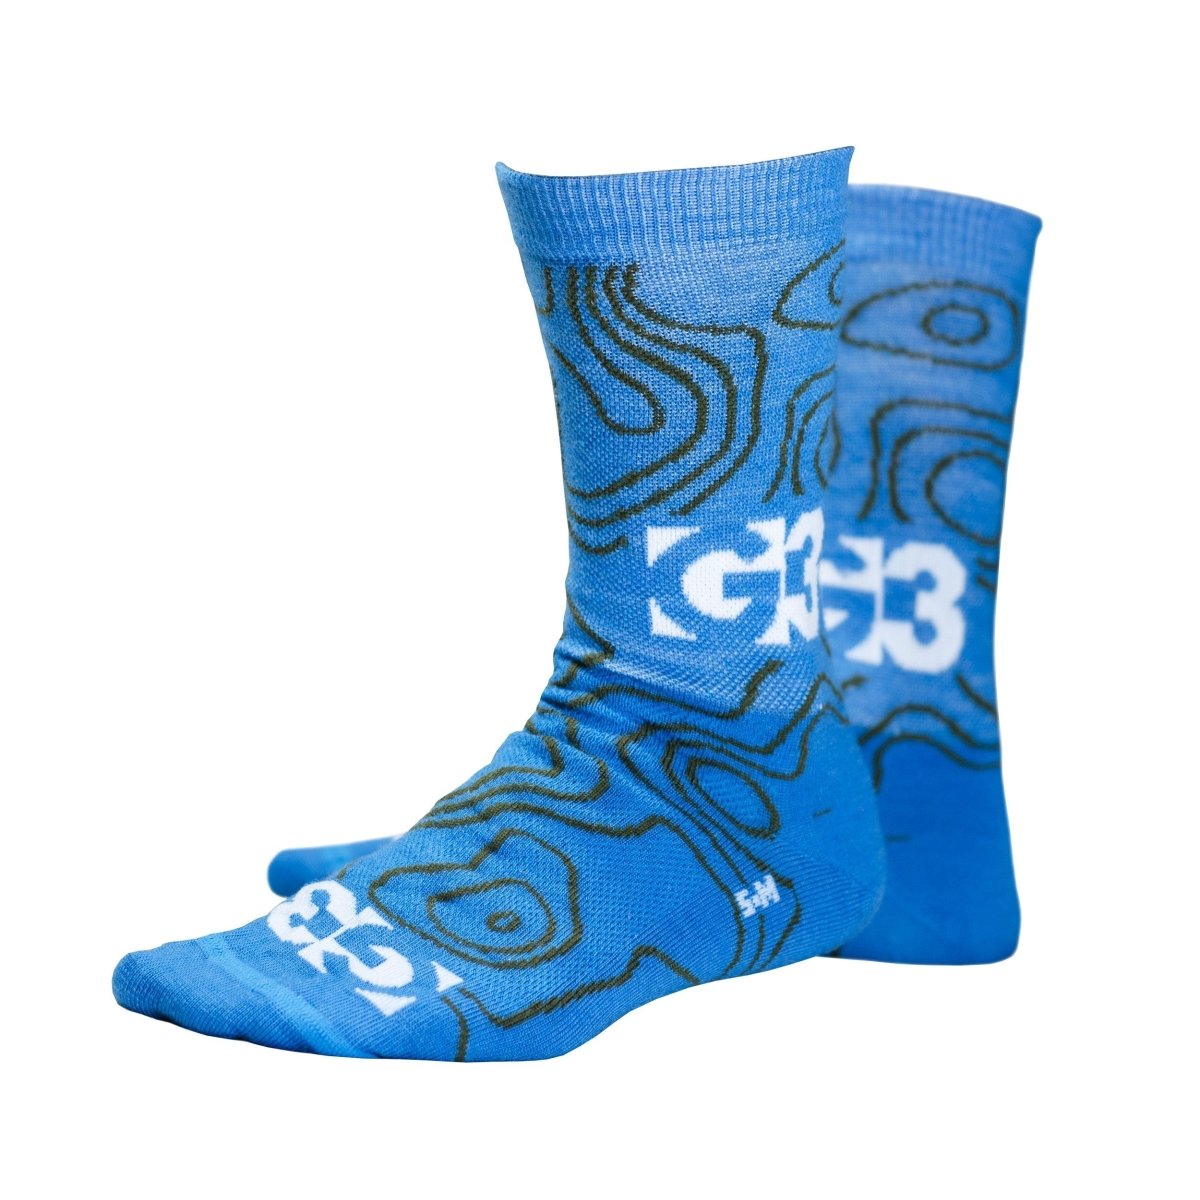 G3 Hike Socks - Accessories - G3 Store [CAD]